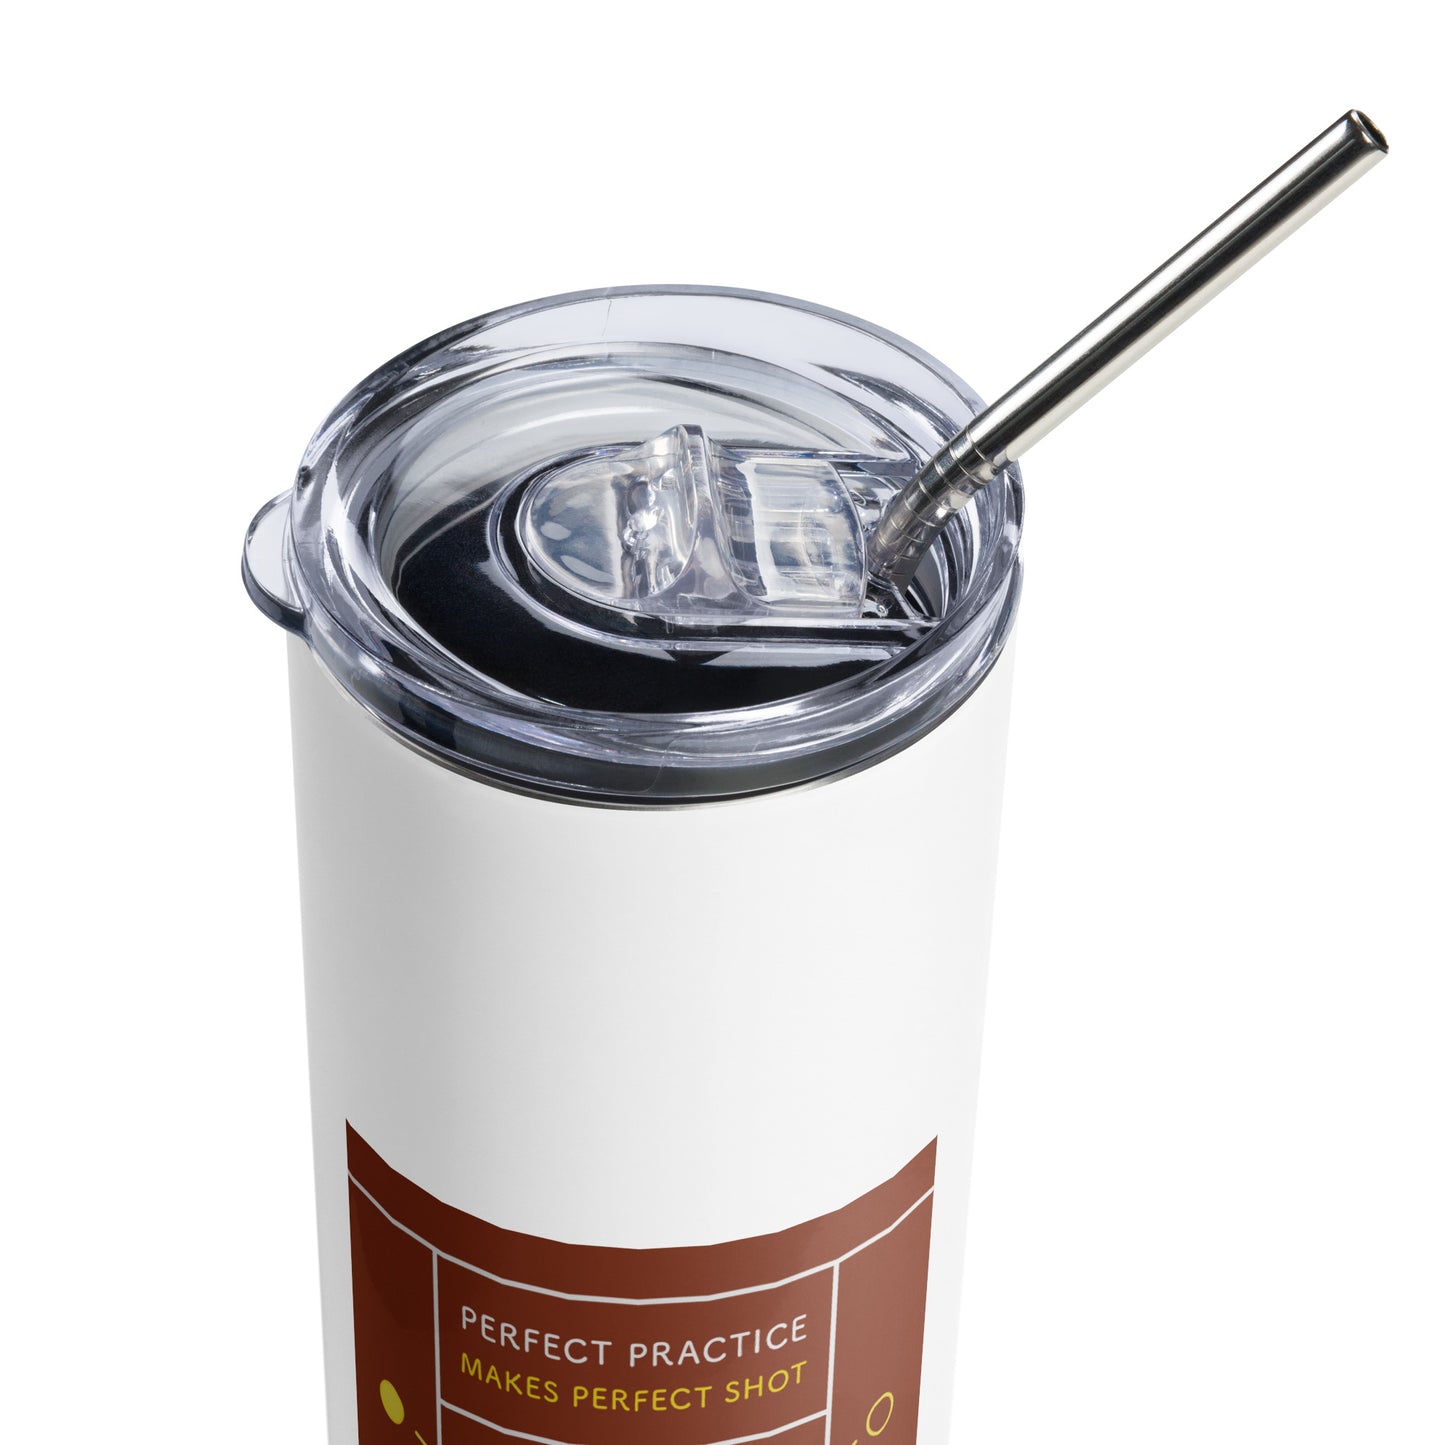 Stainless steel tumbler - Perfect Practice Makes Perfect Shot!